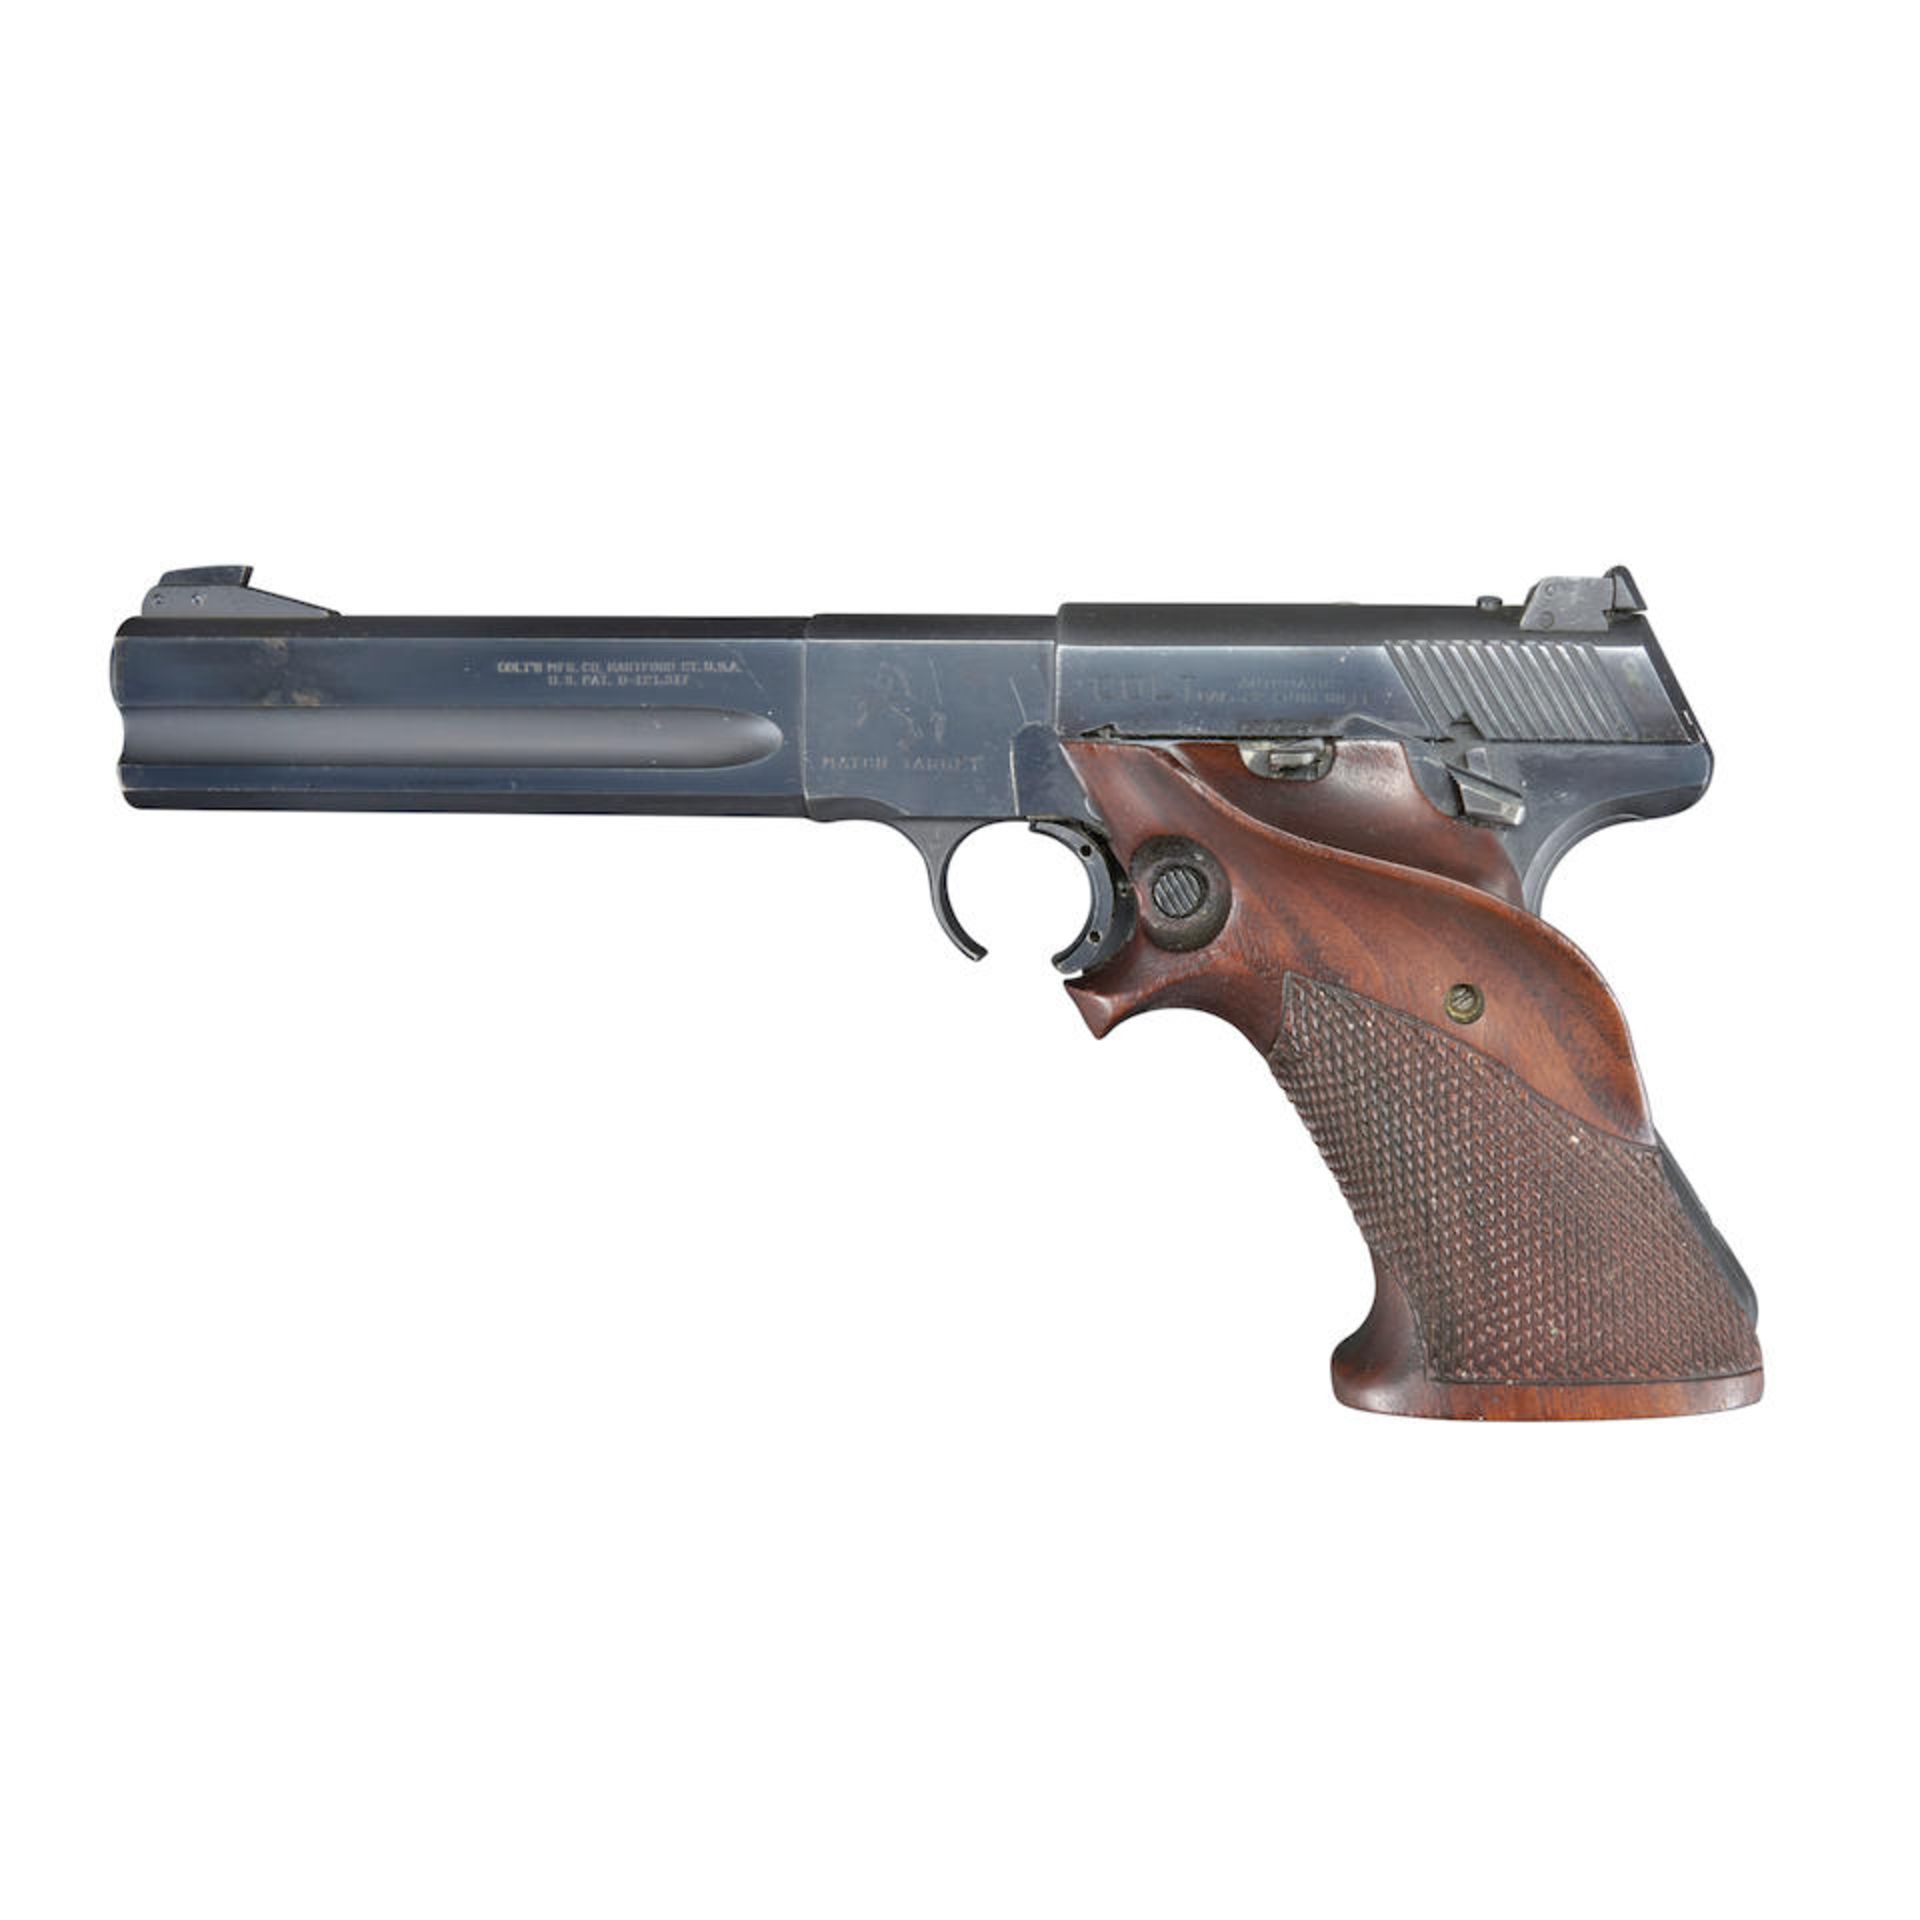 Colt Match Target Semi-Automatic Pistol, Curio or Relic firearm - Image 2 of 2